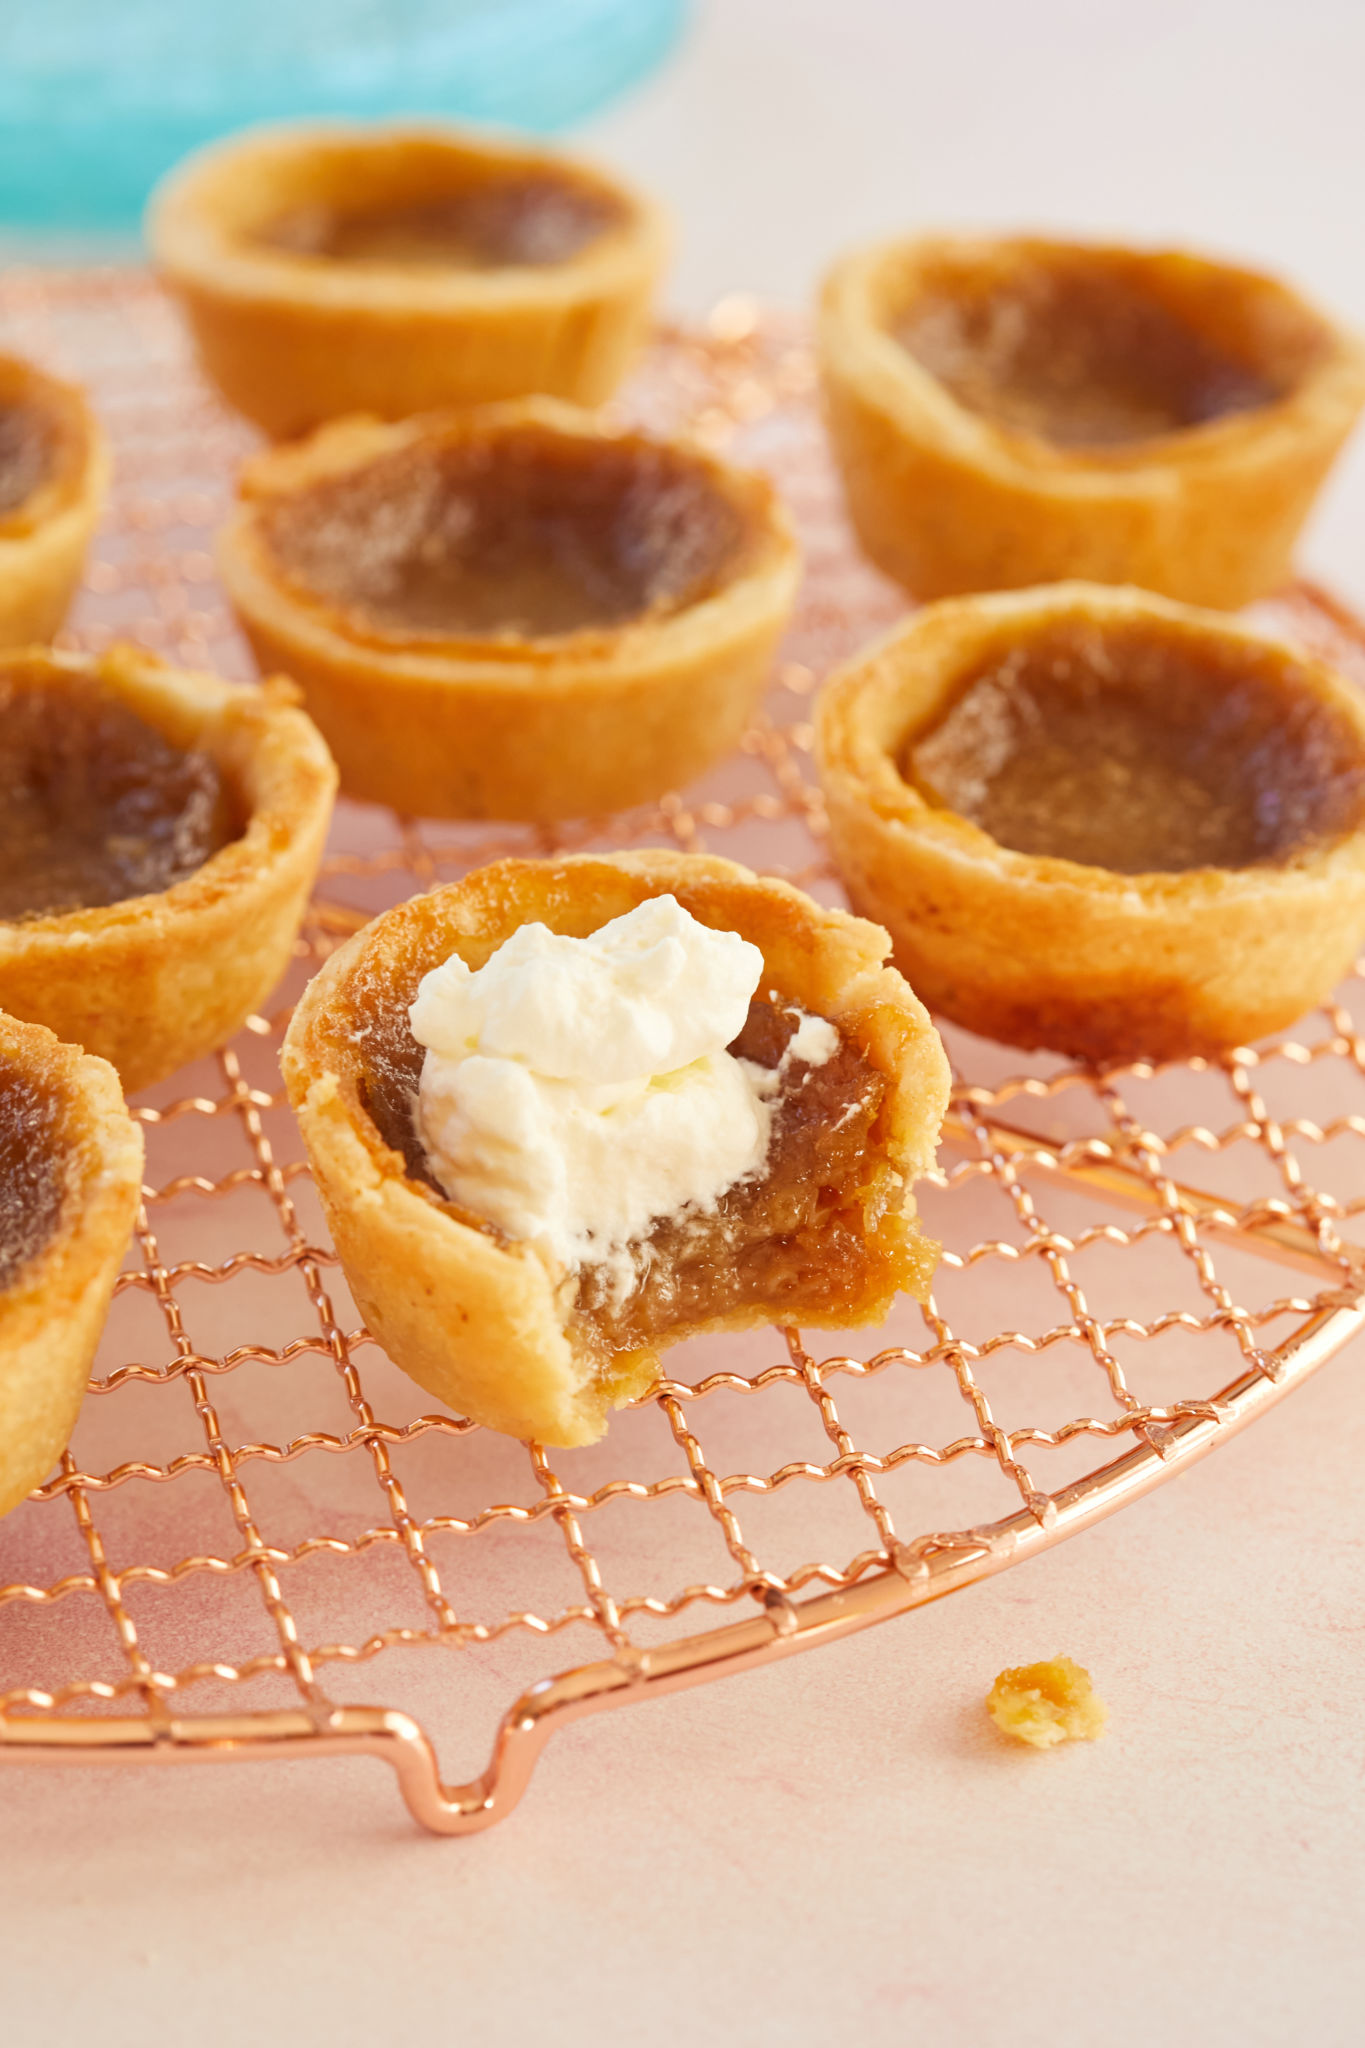 The interior of my Canadian Butter Tart recipe.